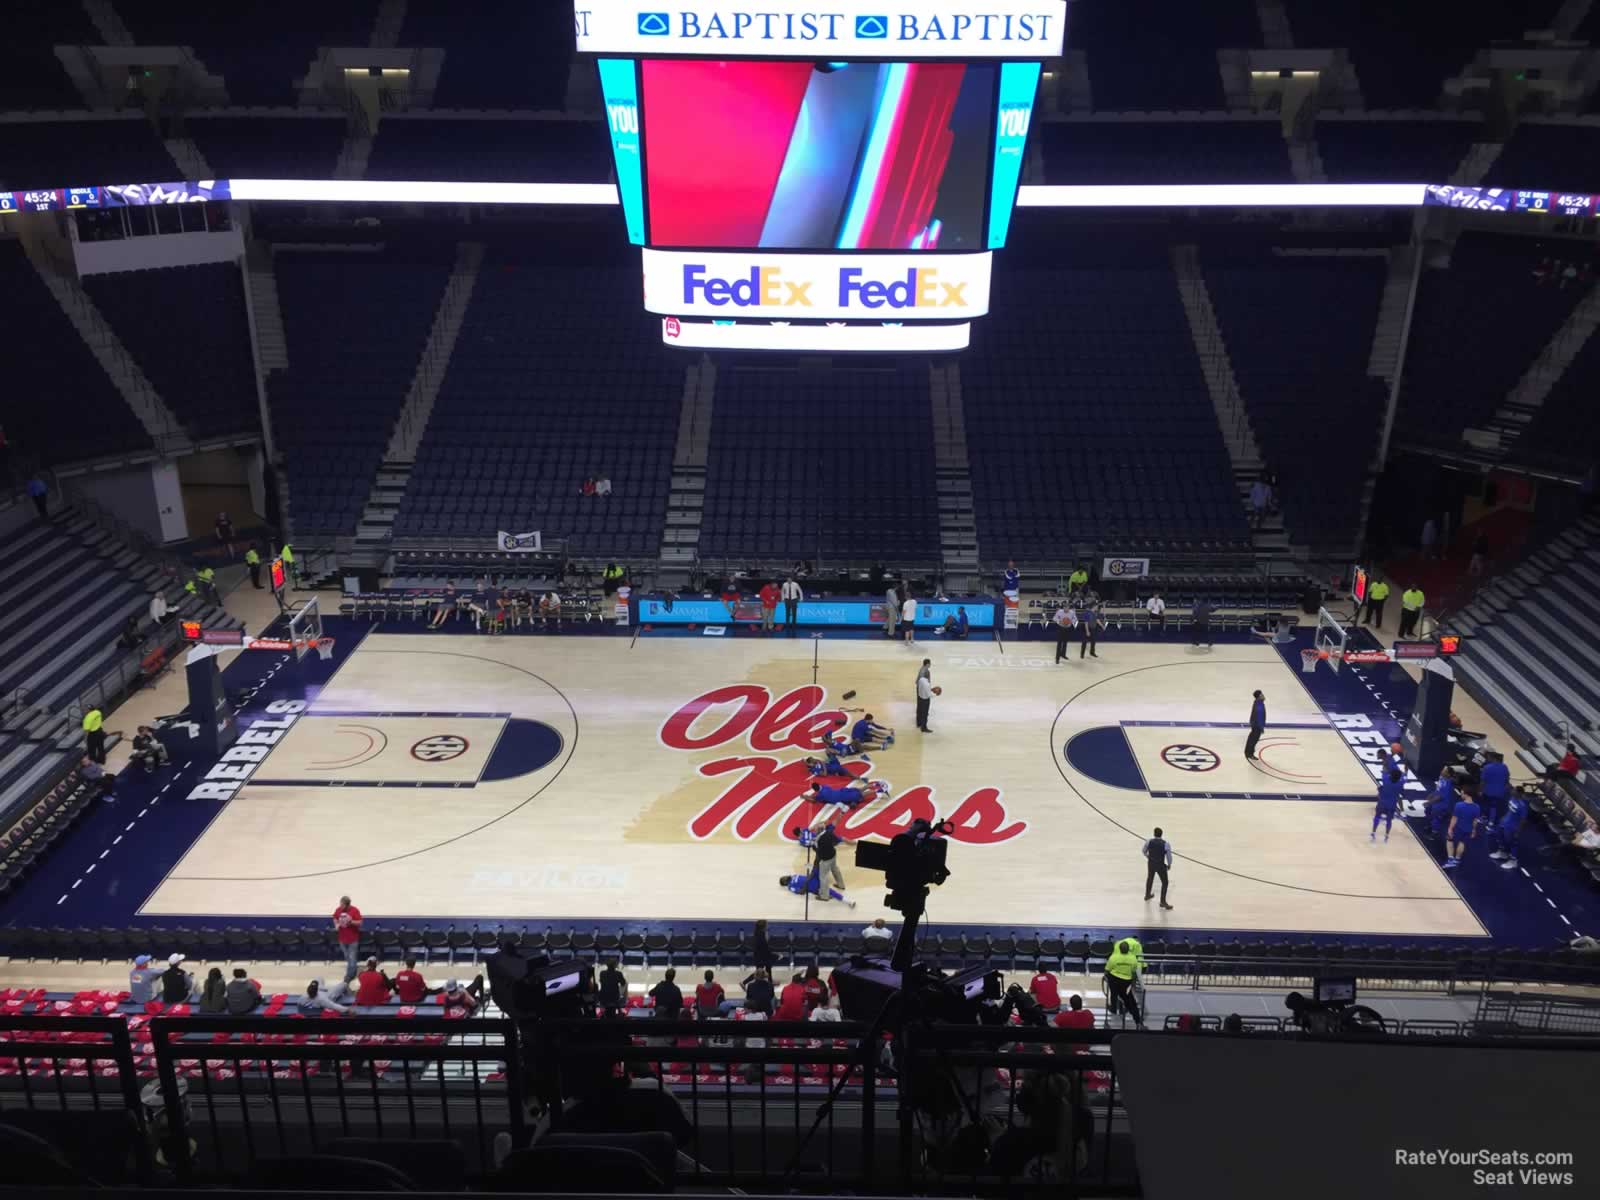 section 204, row 3 seat view  - pavilion at ole miss